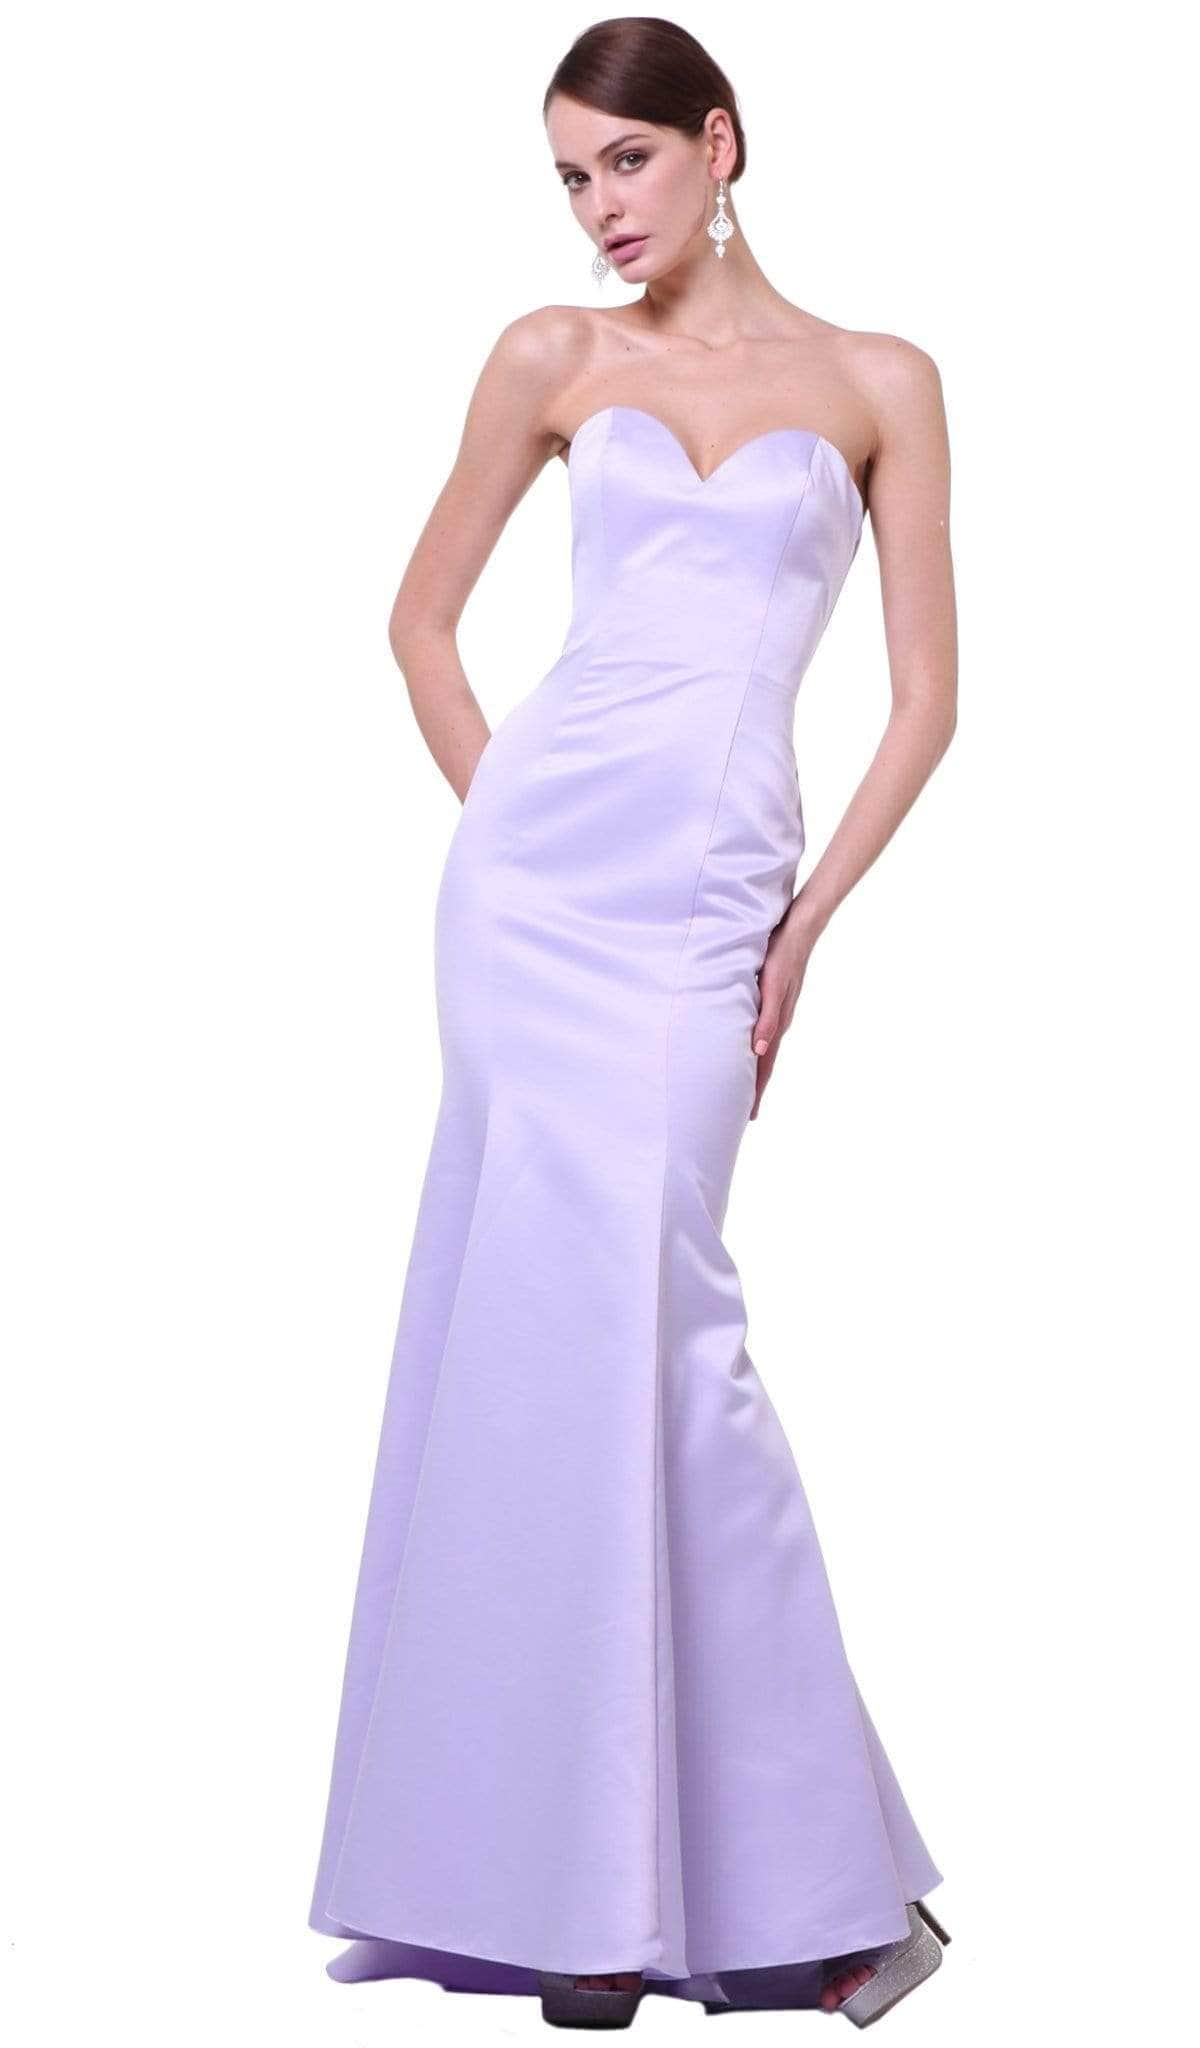 Ladivine 8792 - Strapless Seamed Prom Gown Prom Dresses 4 